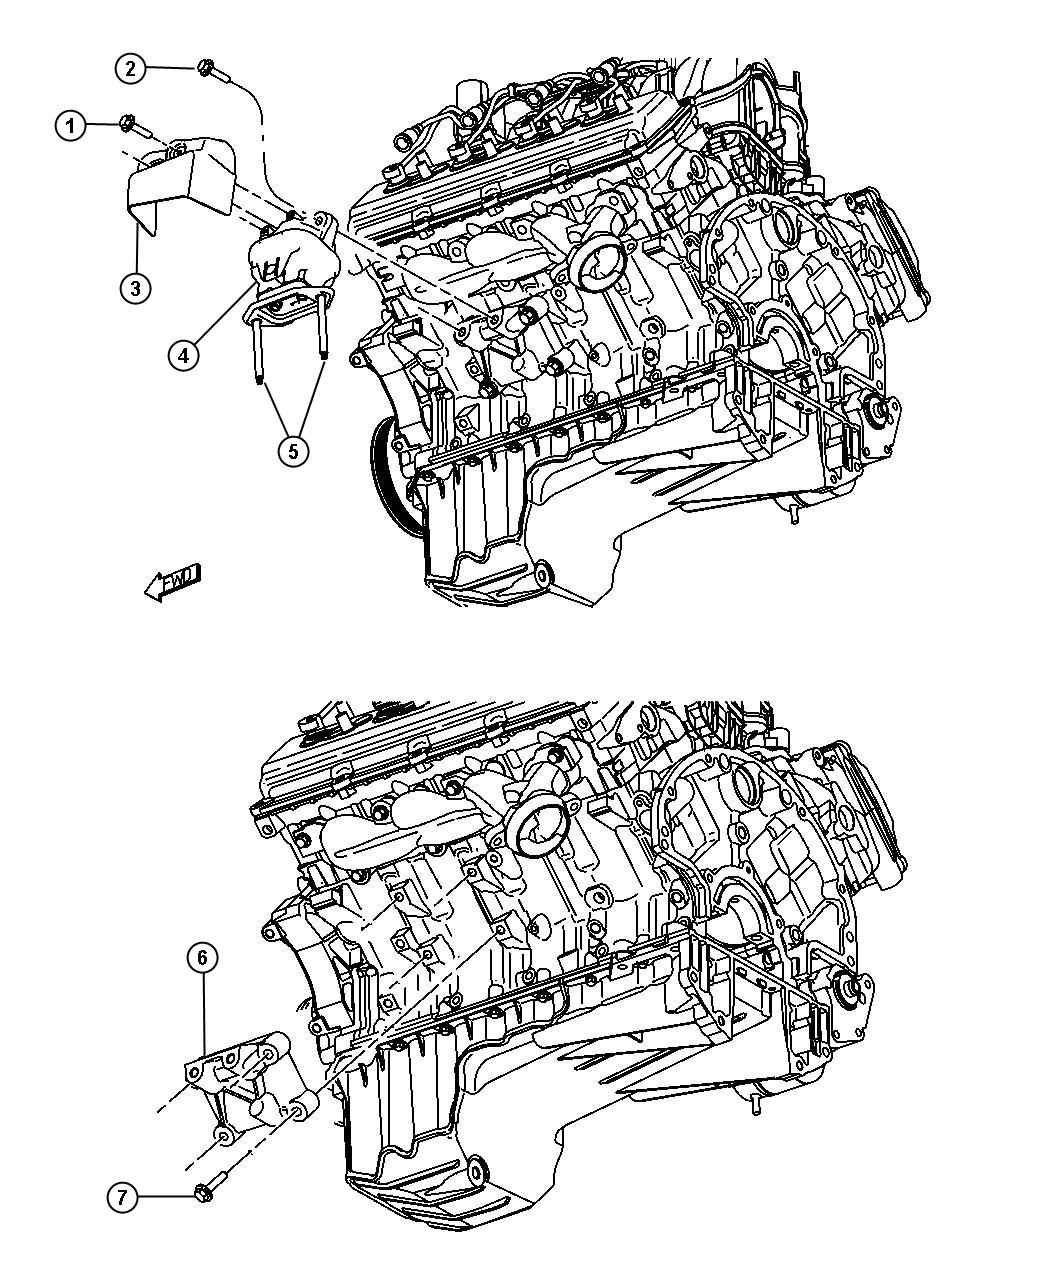 Chrysler 300 Cushion. Engine support. Left, right. Displacement, side